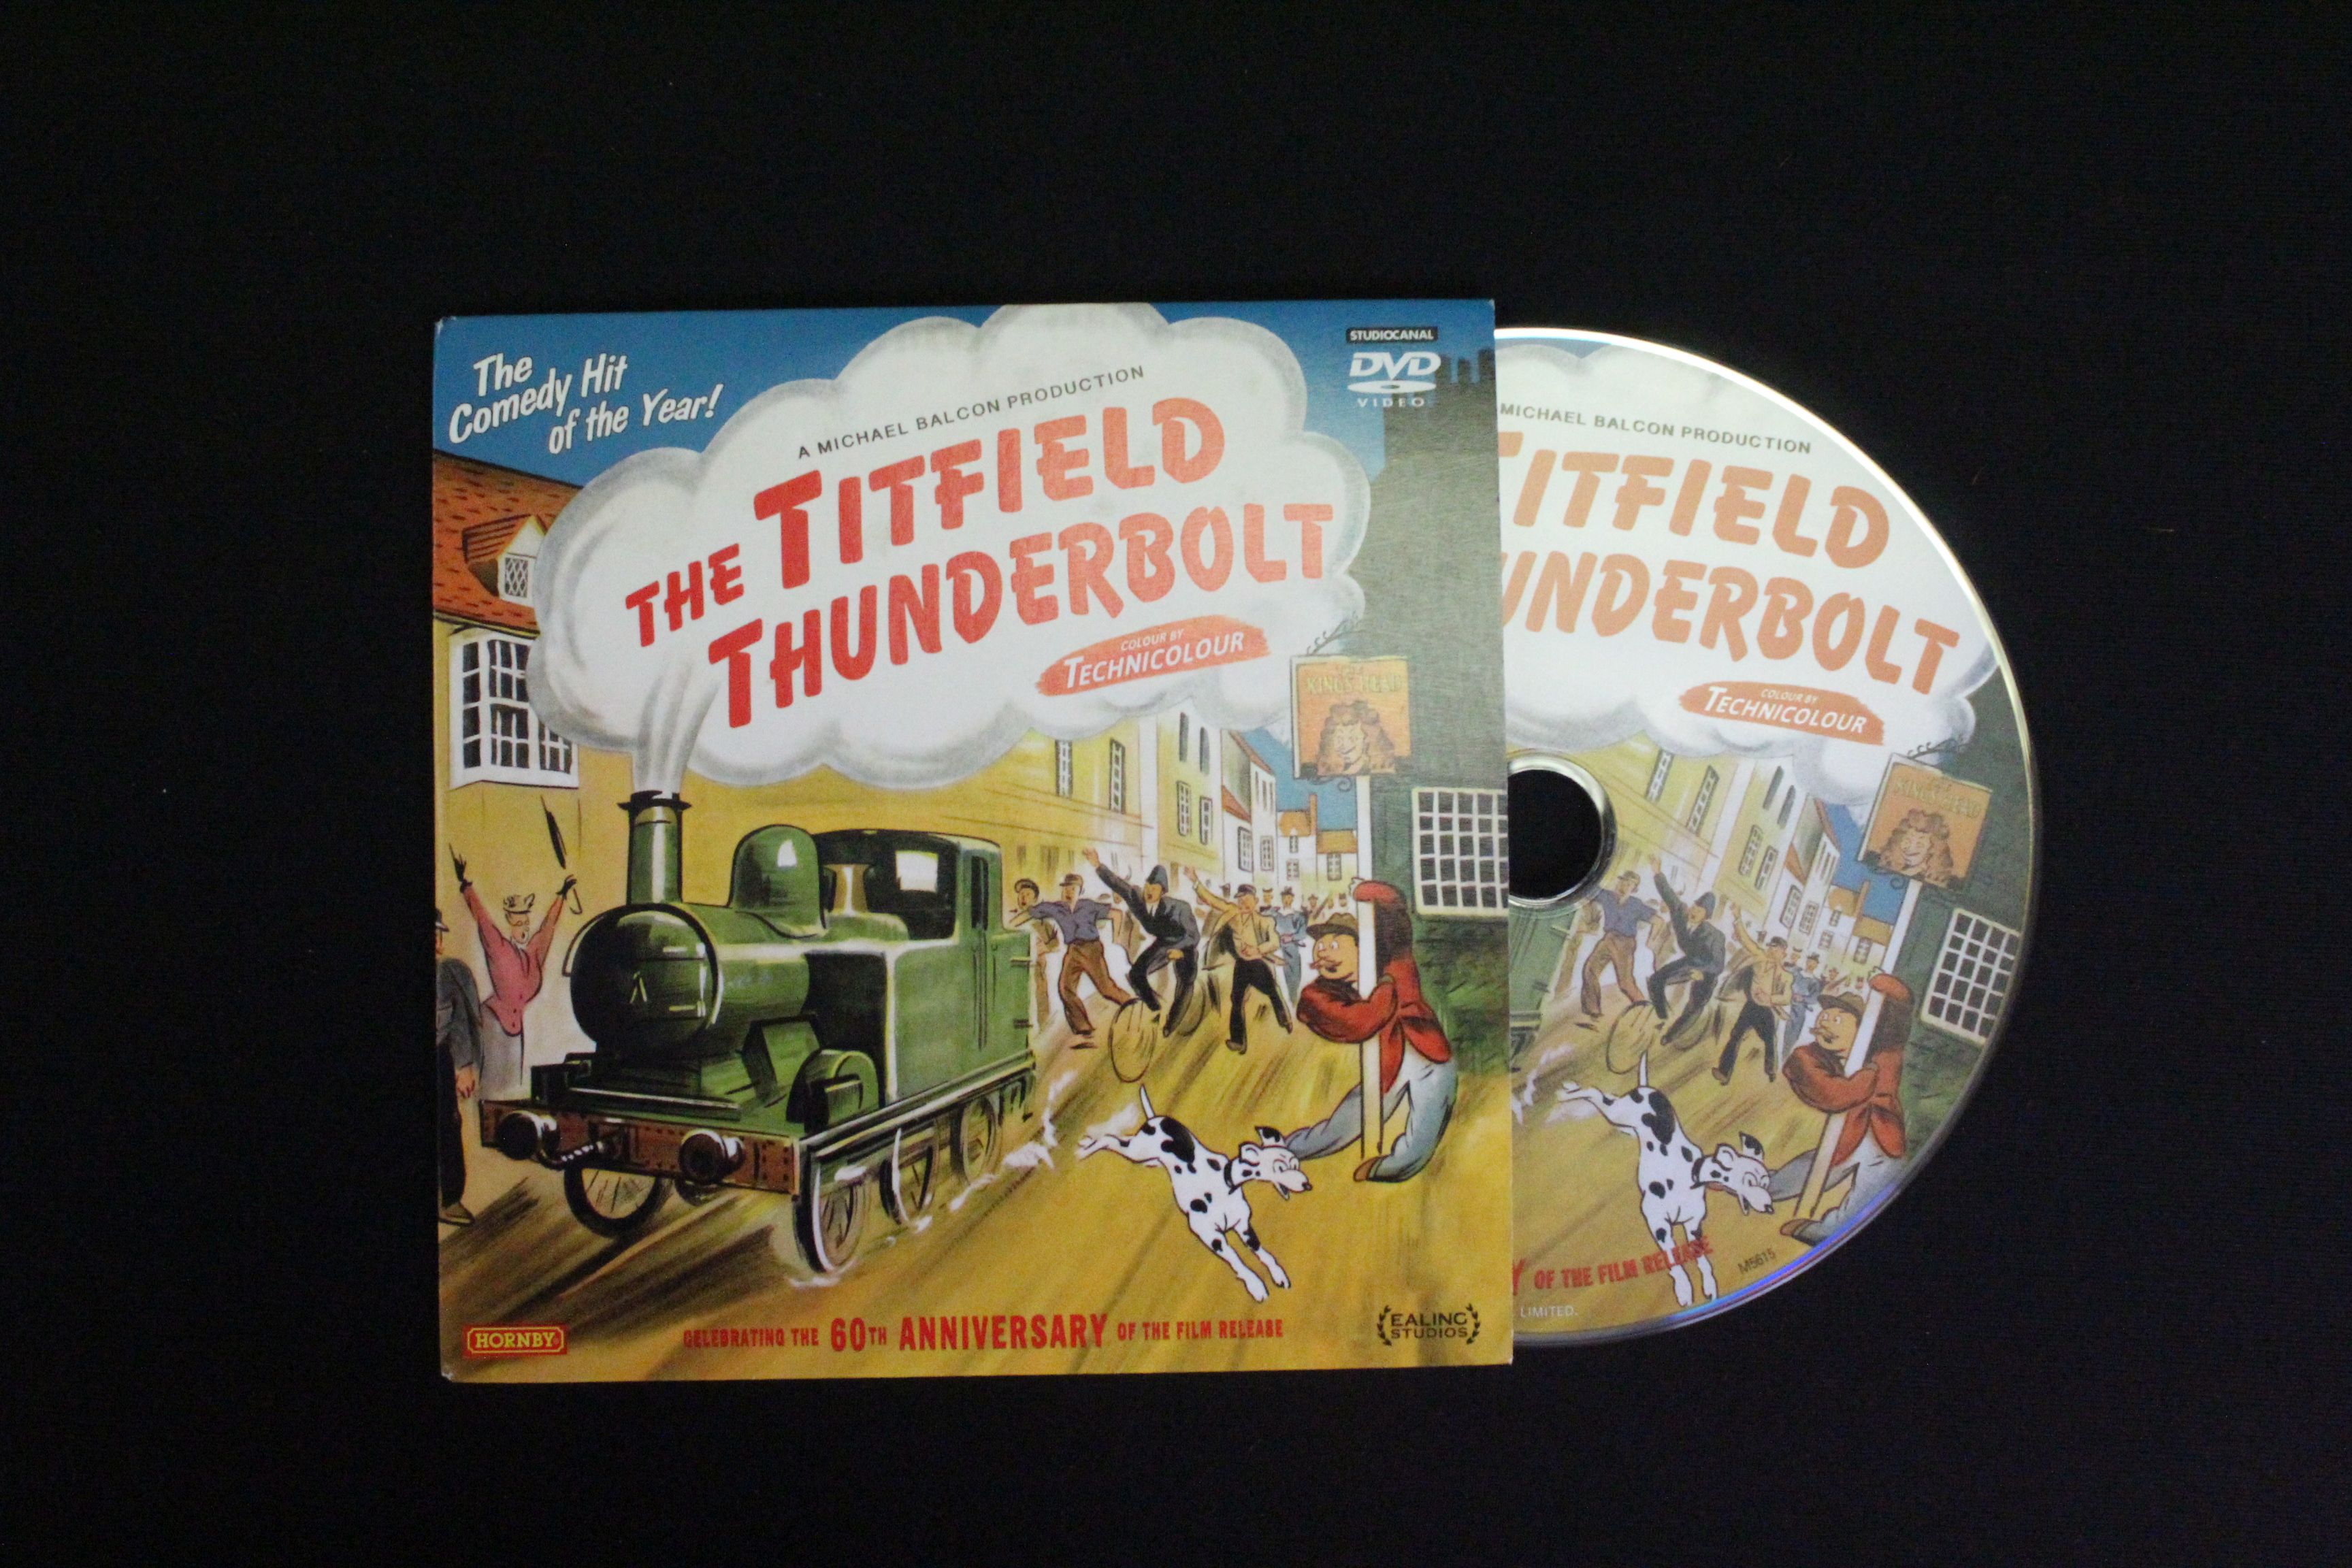 Boxed ltd edn Hornby OO gauge The Titfield Thunderbolt locomotive, complete with poster & DVD - Image 9 of 9